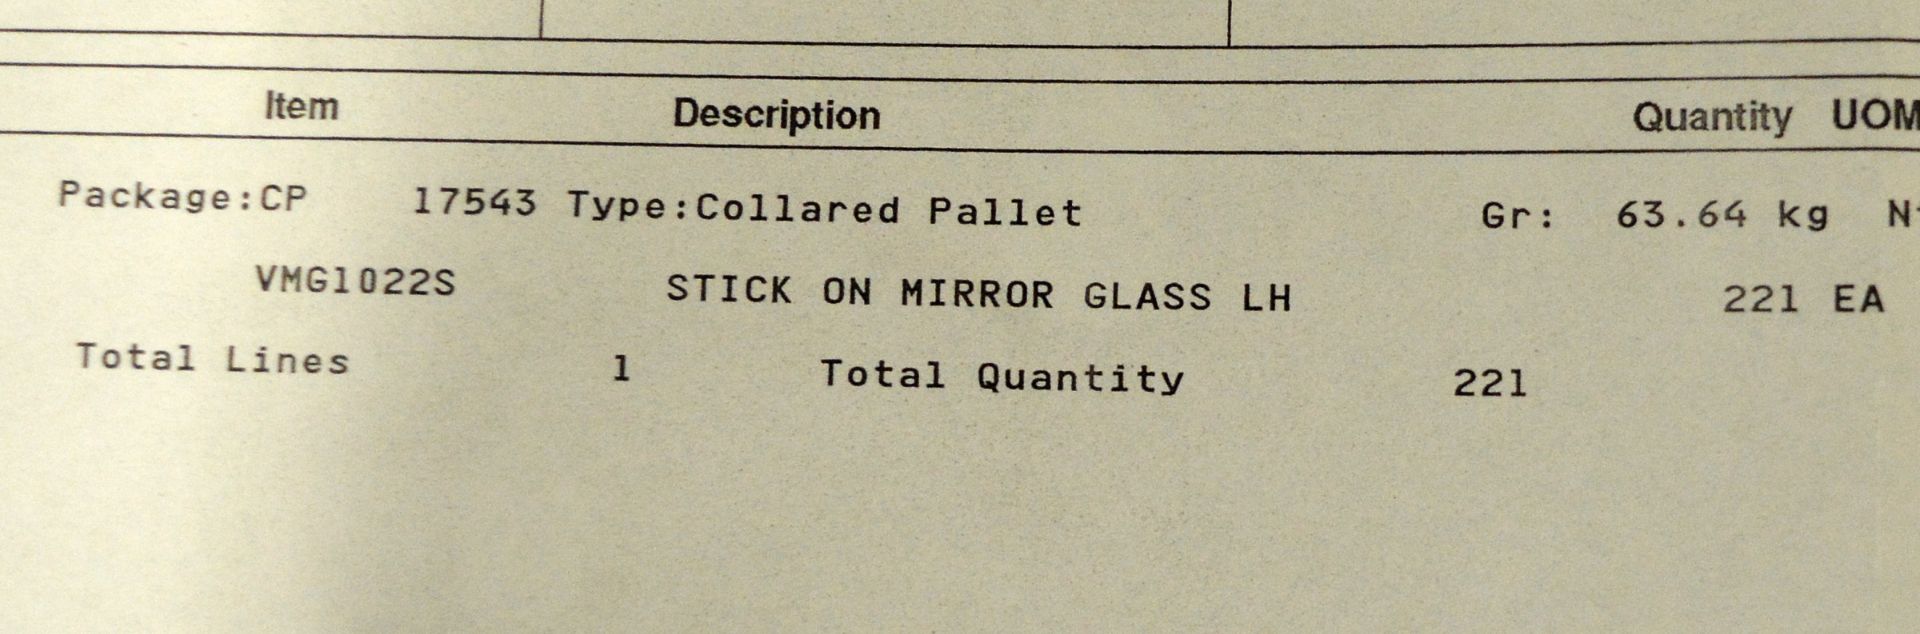 Vehicle parts - VMG1022S stick on mirror glass LH x221 approx - see picture for itinerary - Image 4 of 4